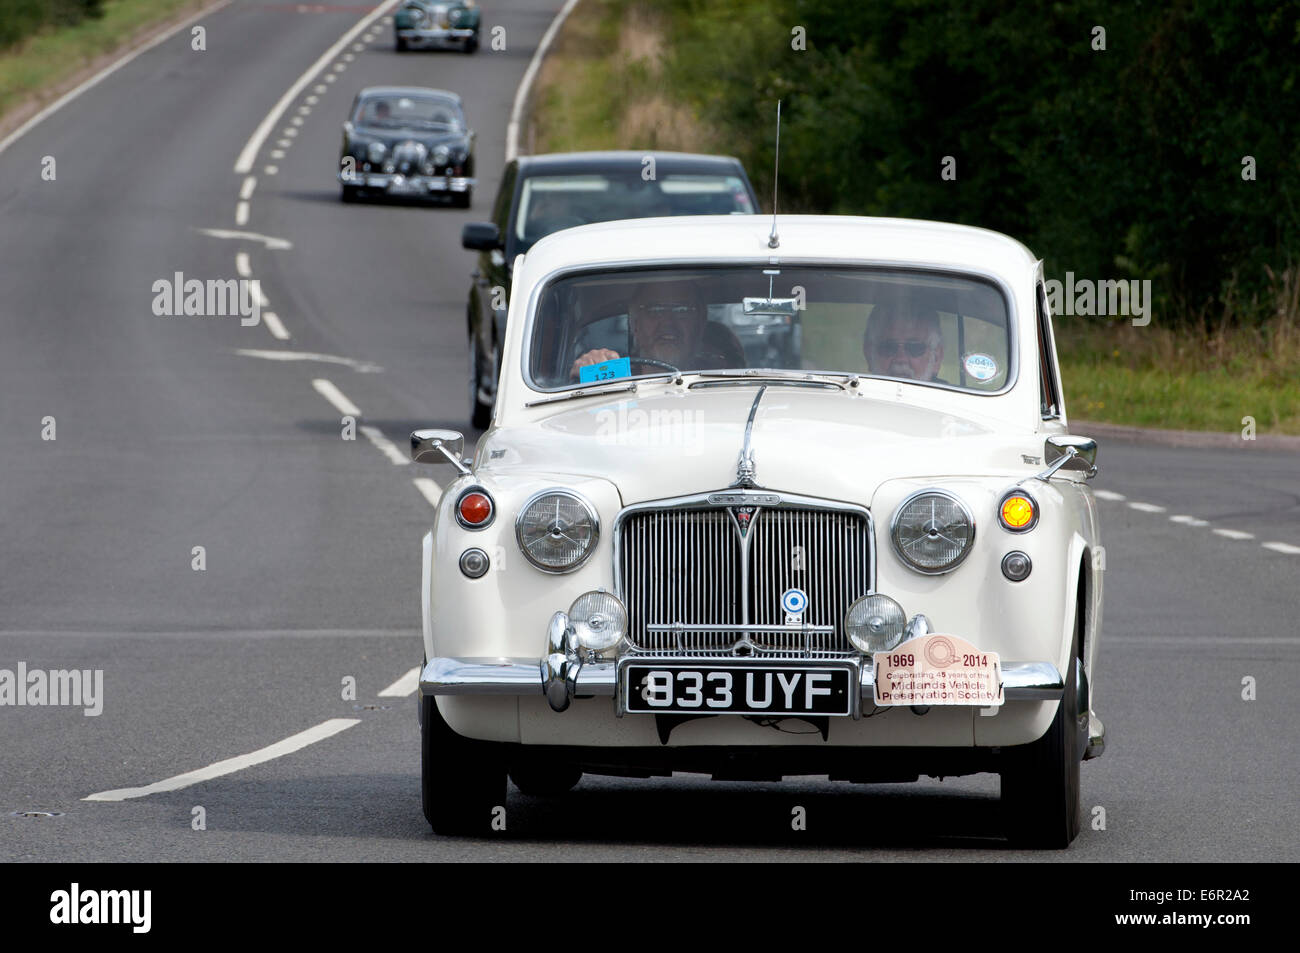 Rover 100 car on the Fosse Way road, Warwickshire, UK Stock Photo